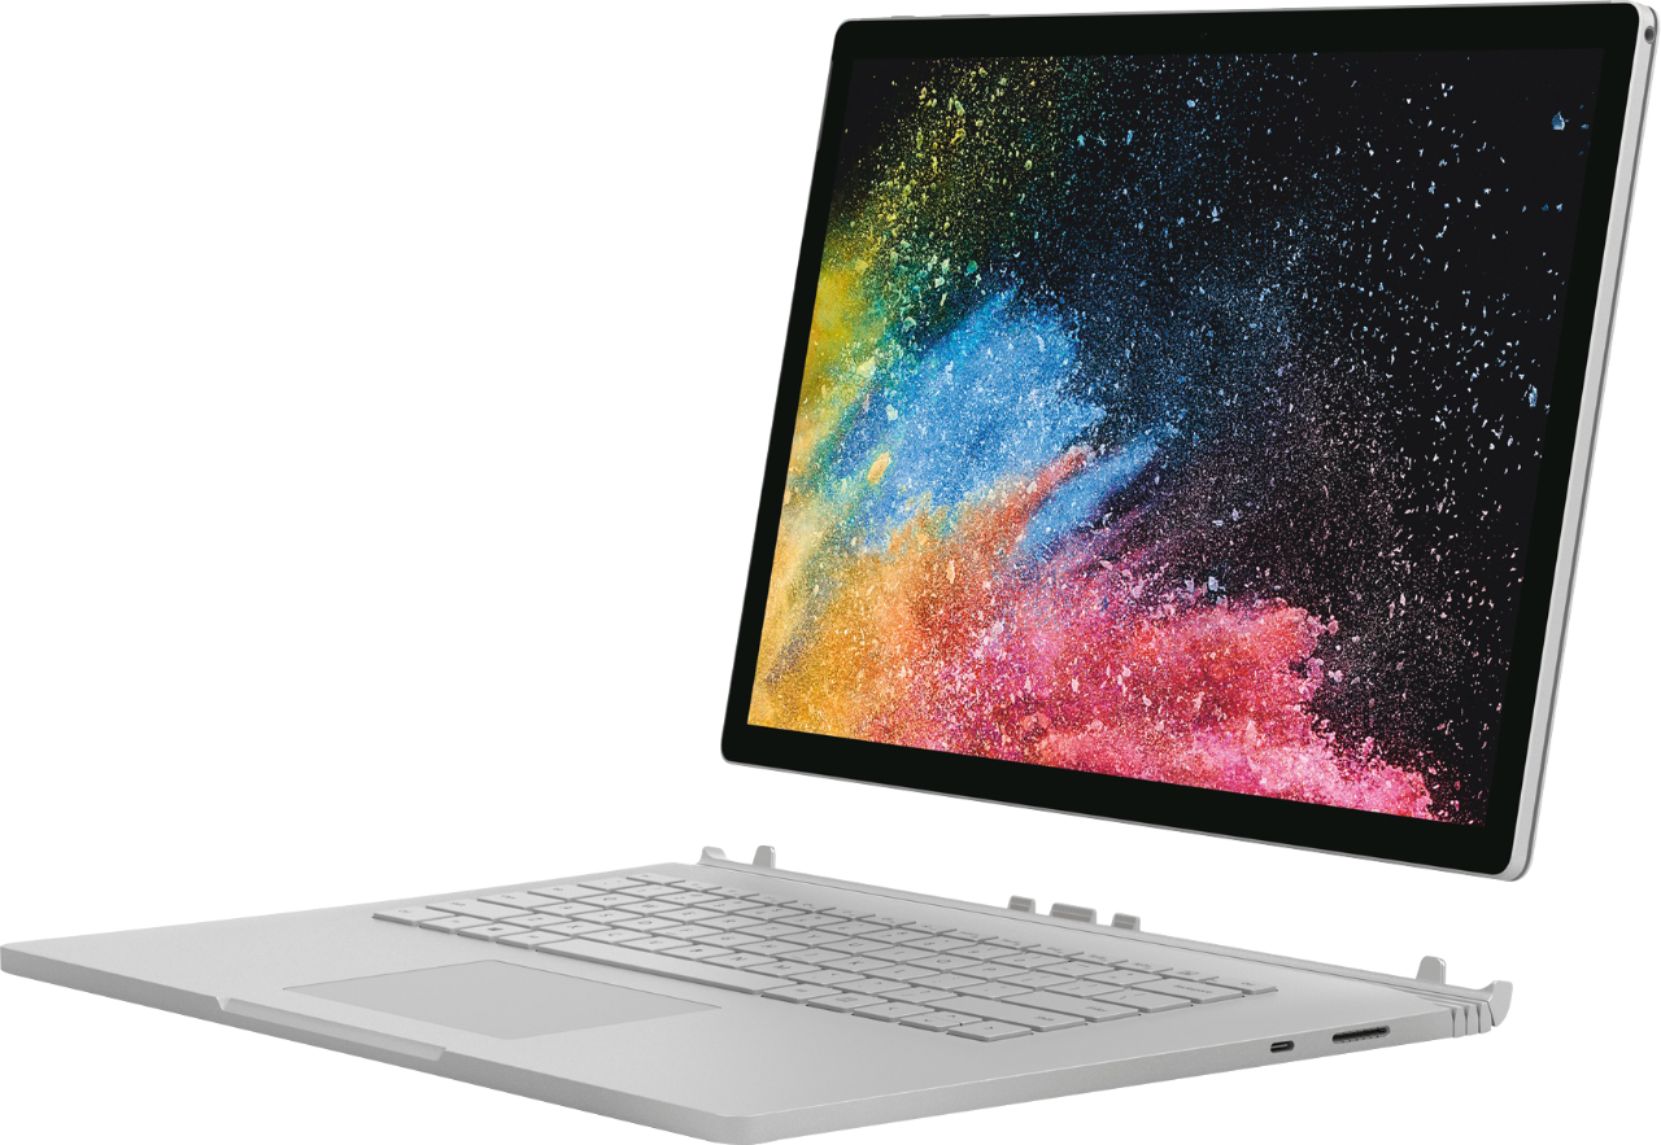 Customer Reviews Microsoft Surface Book Touch Screen Pixelsense In Laptop Intel Core